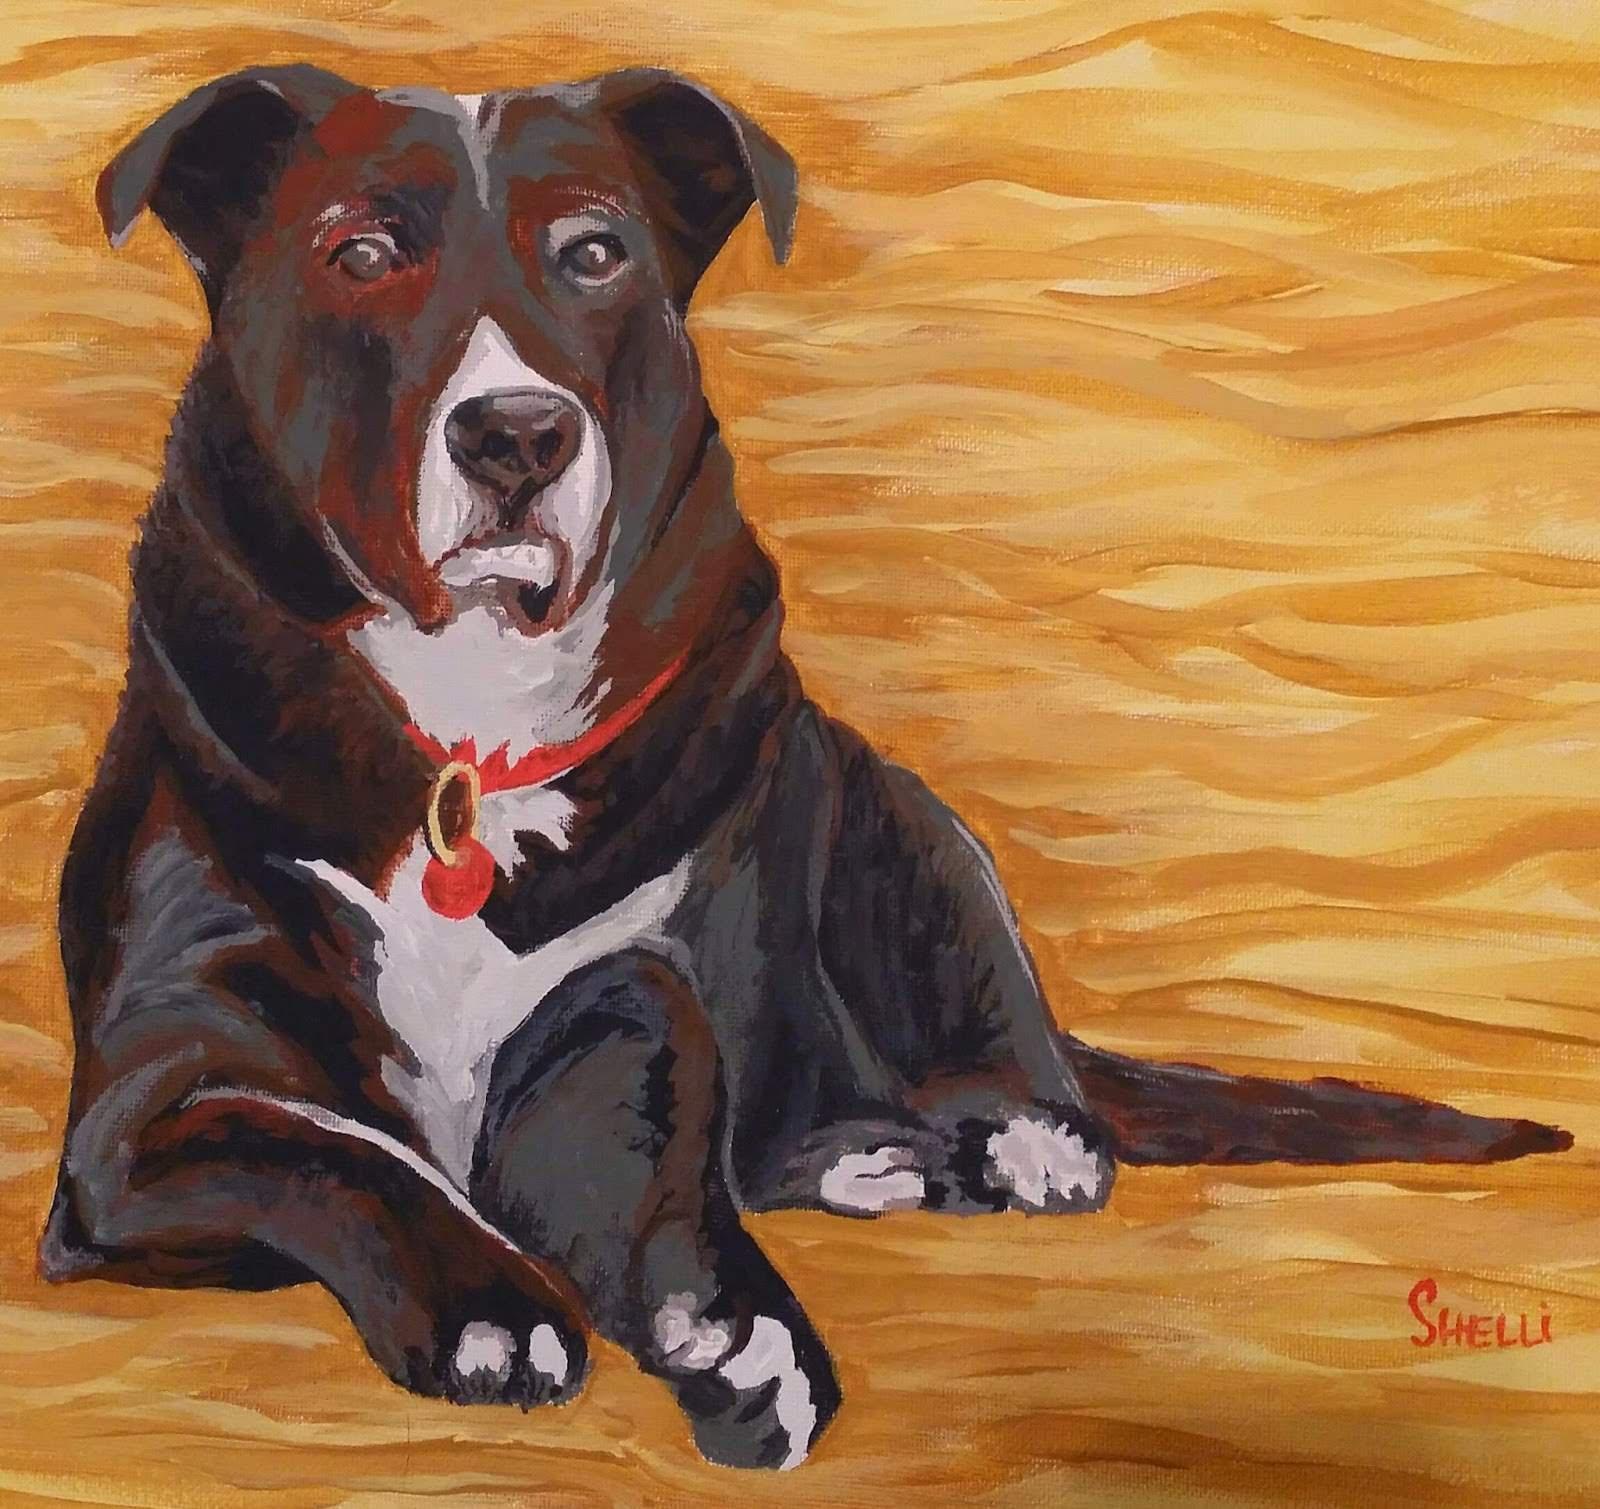 I painted this one amongst my buddy’s doggo about 5 years ago. I in actuality have even handed painting professionally but I want extra apply. Or now no longer it’s honest enough to share in some unspecified time in the future of art work trot although!